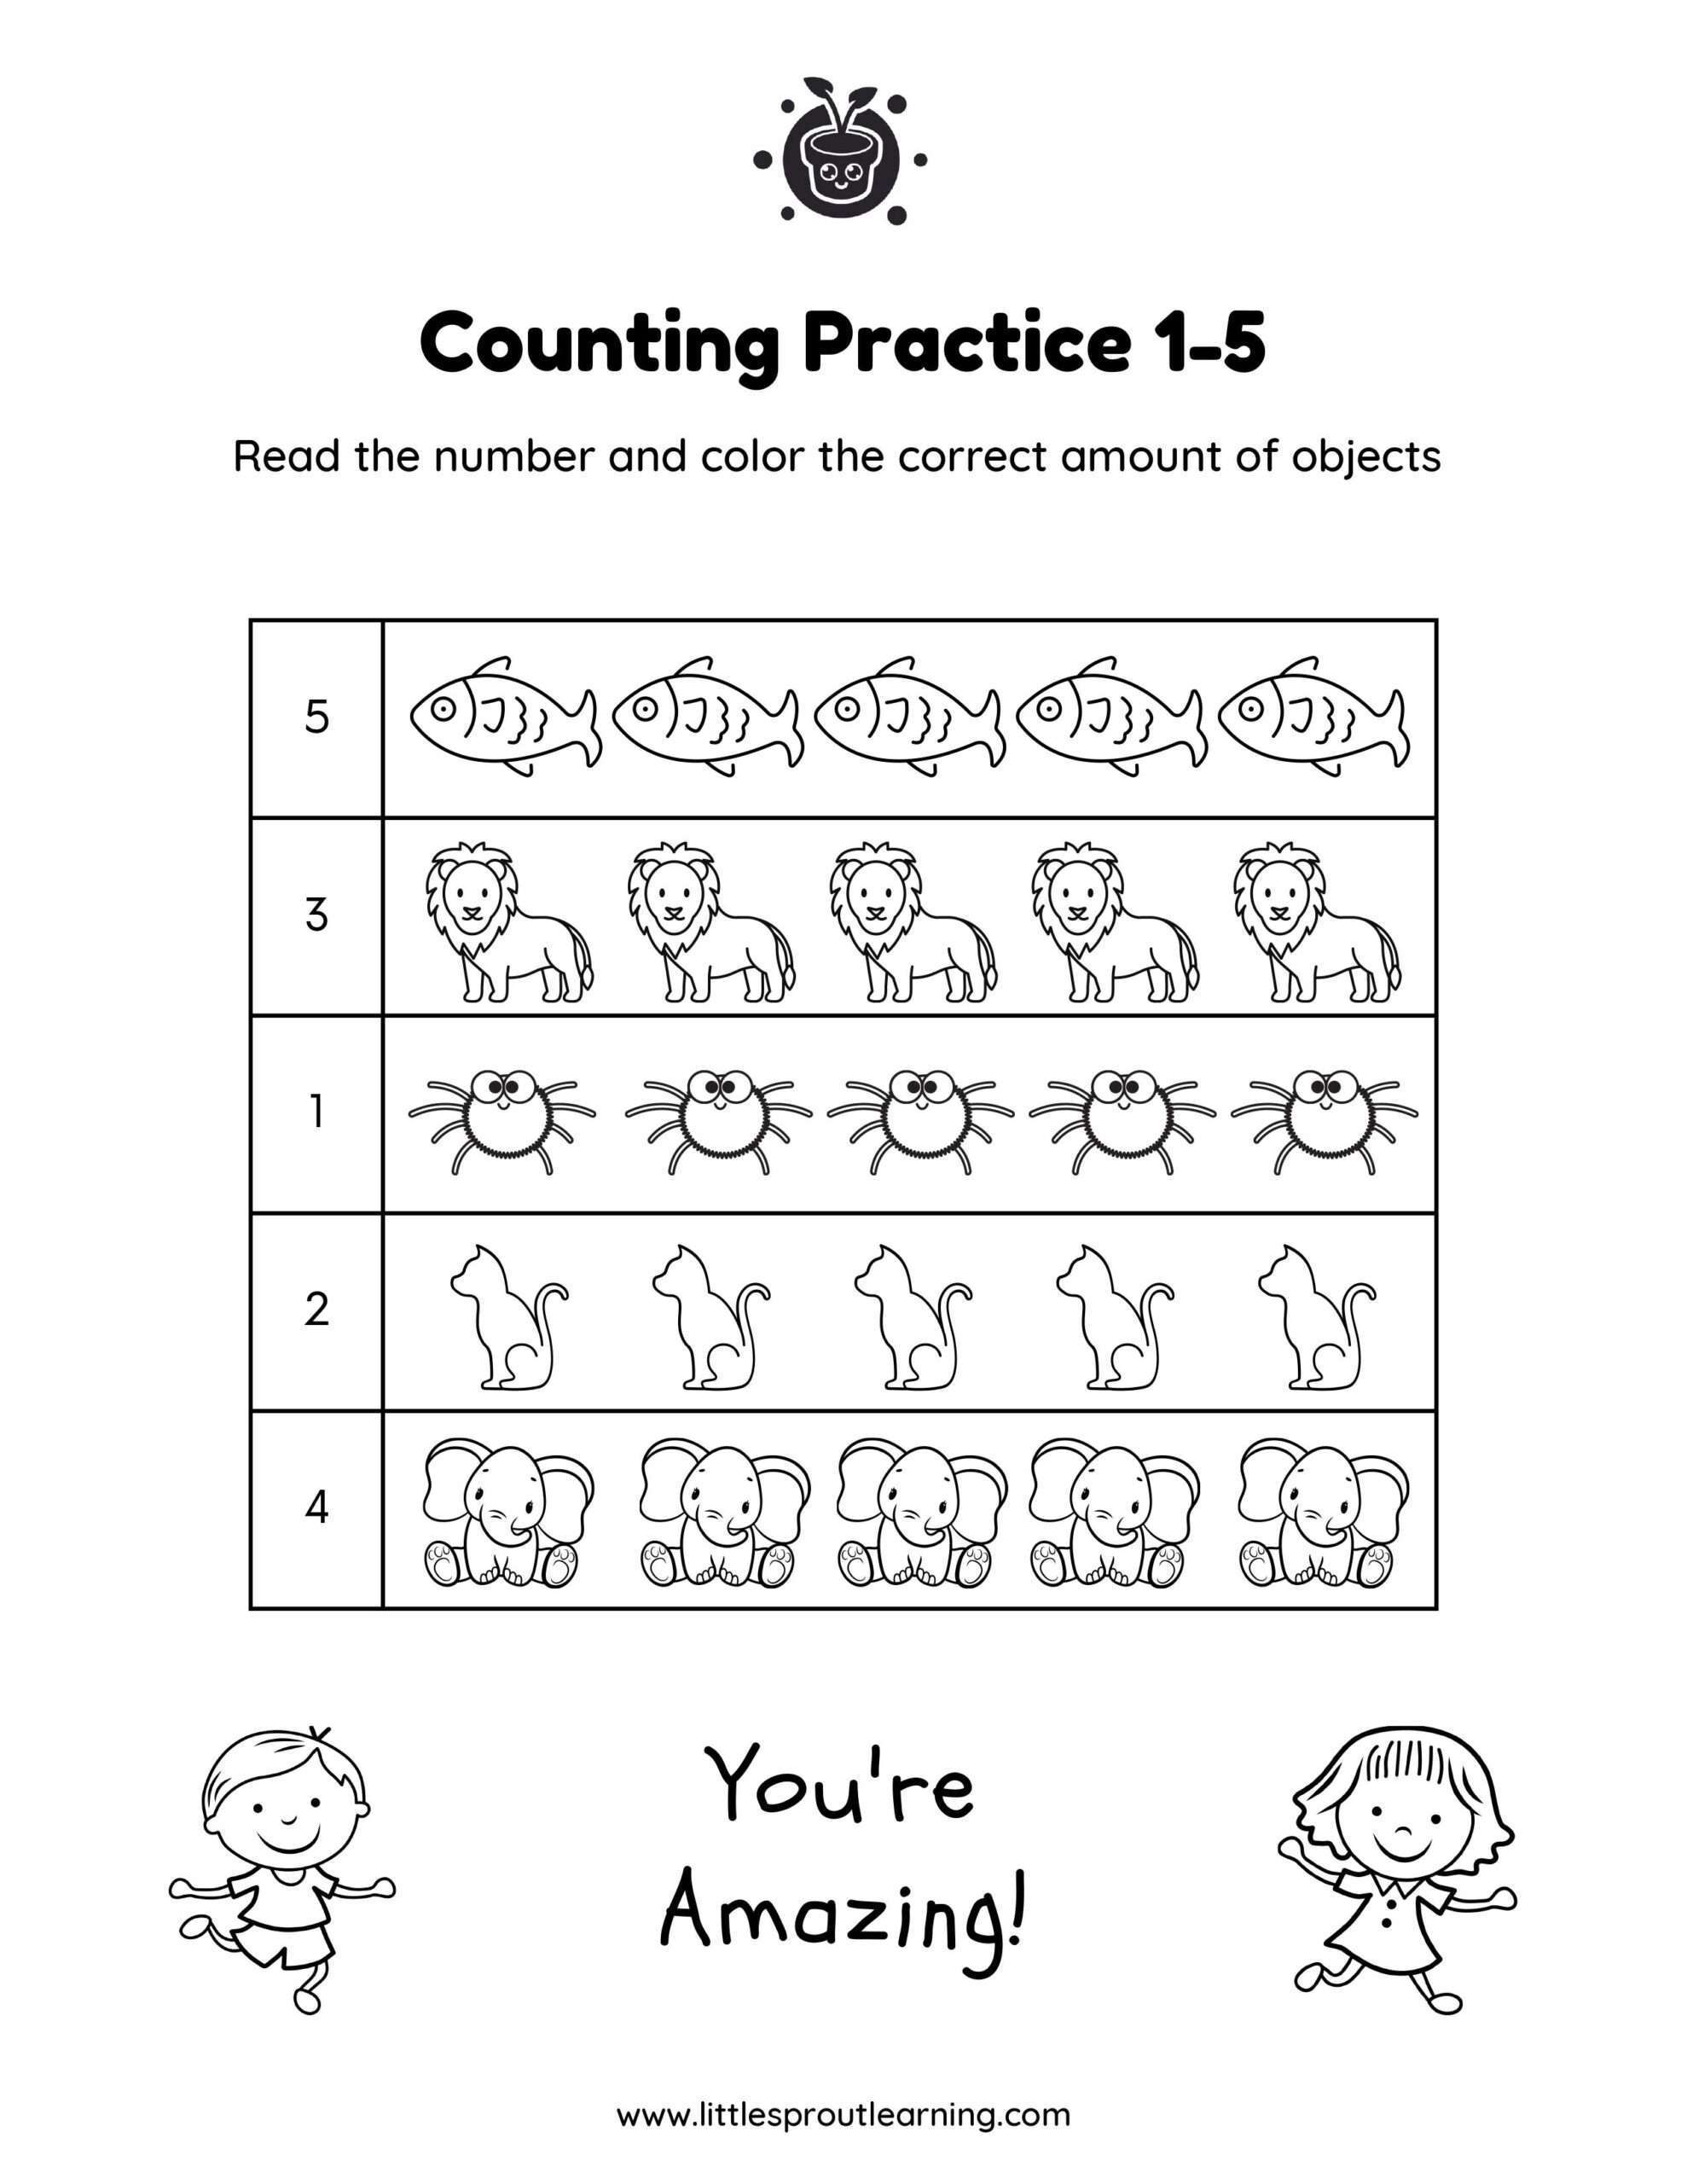 Count and Color Objects 1 – 5